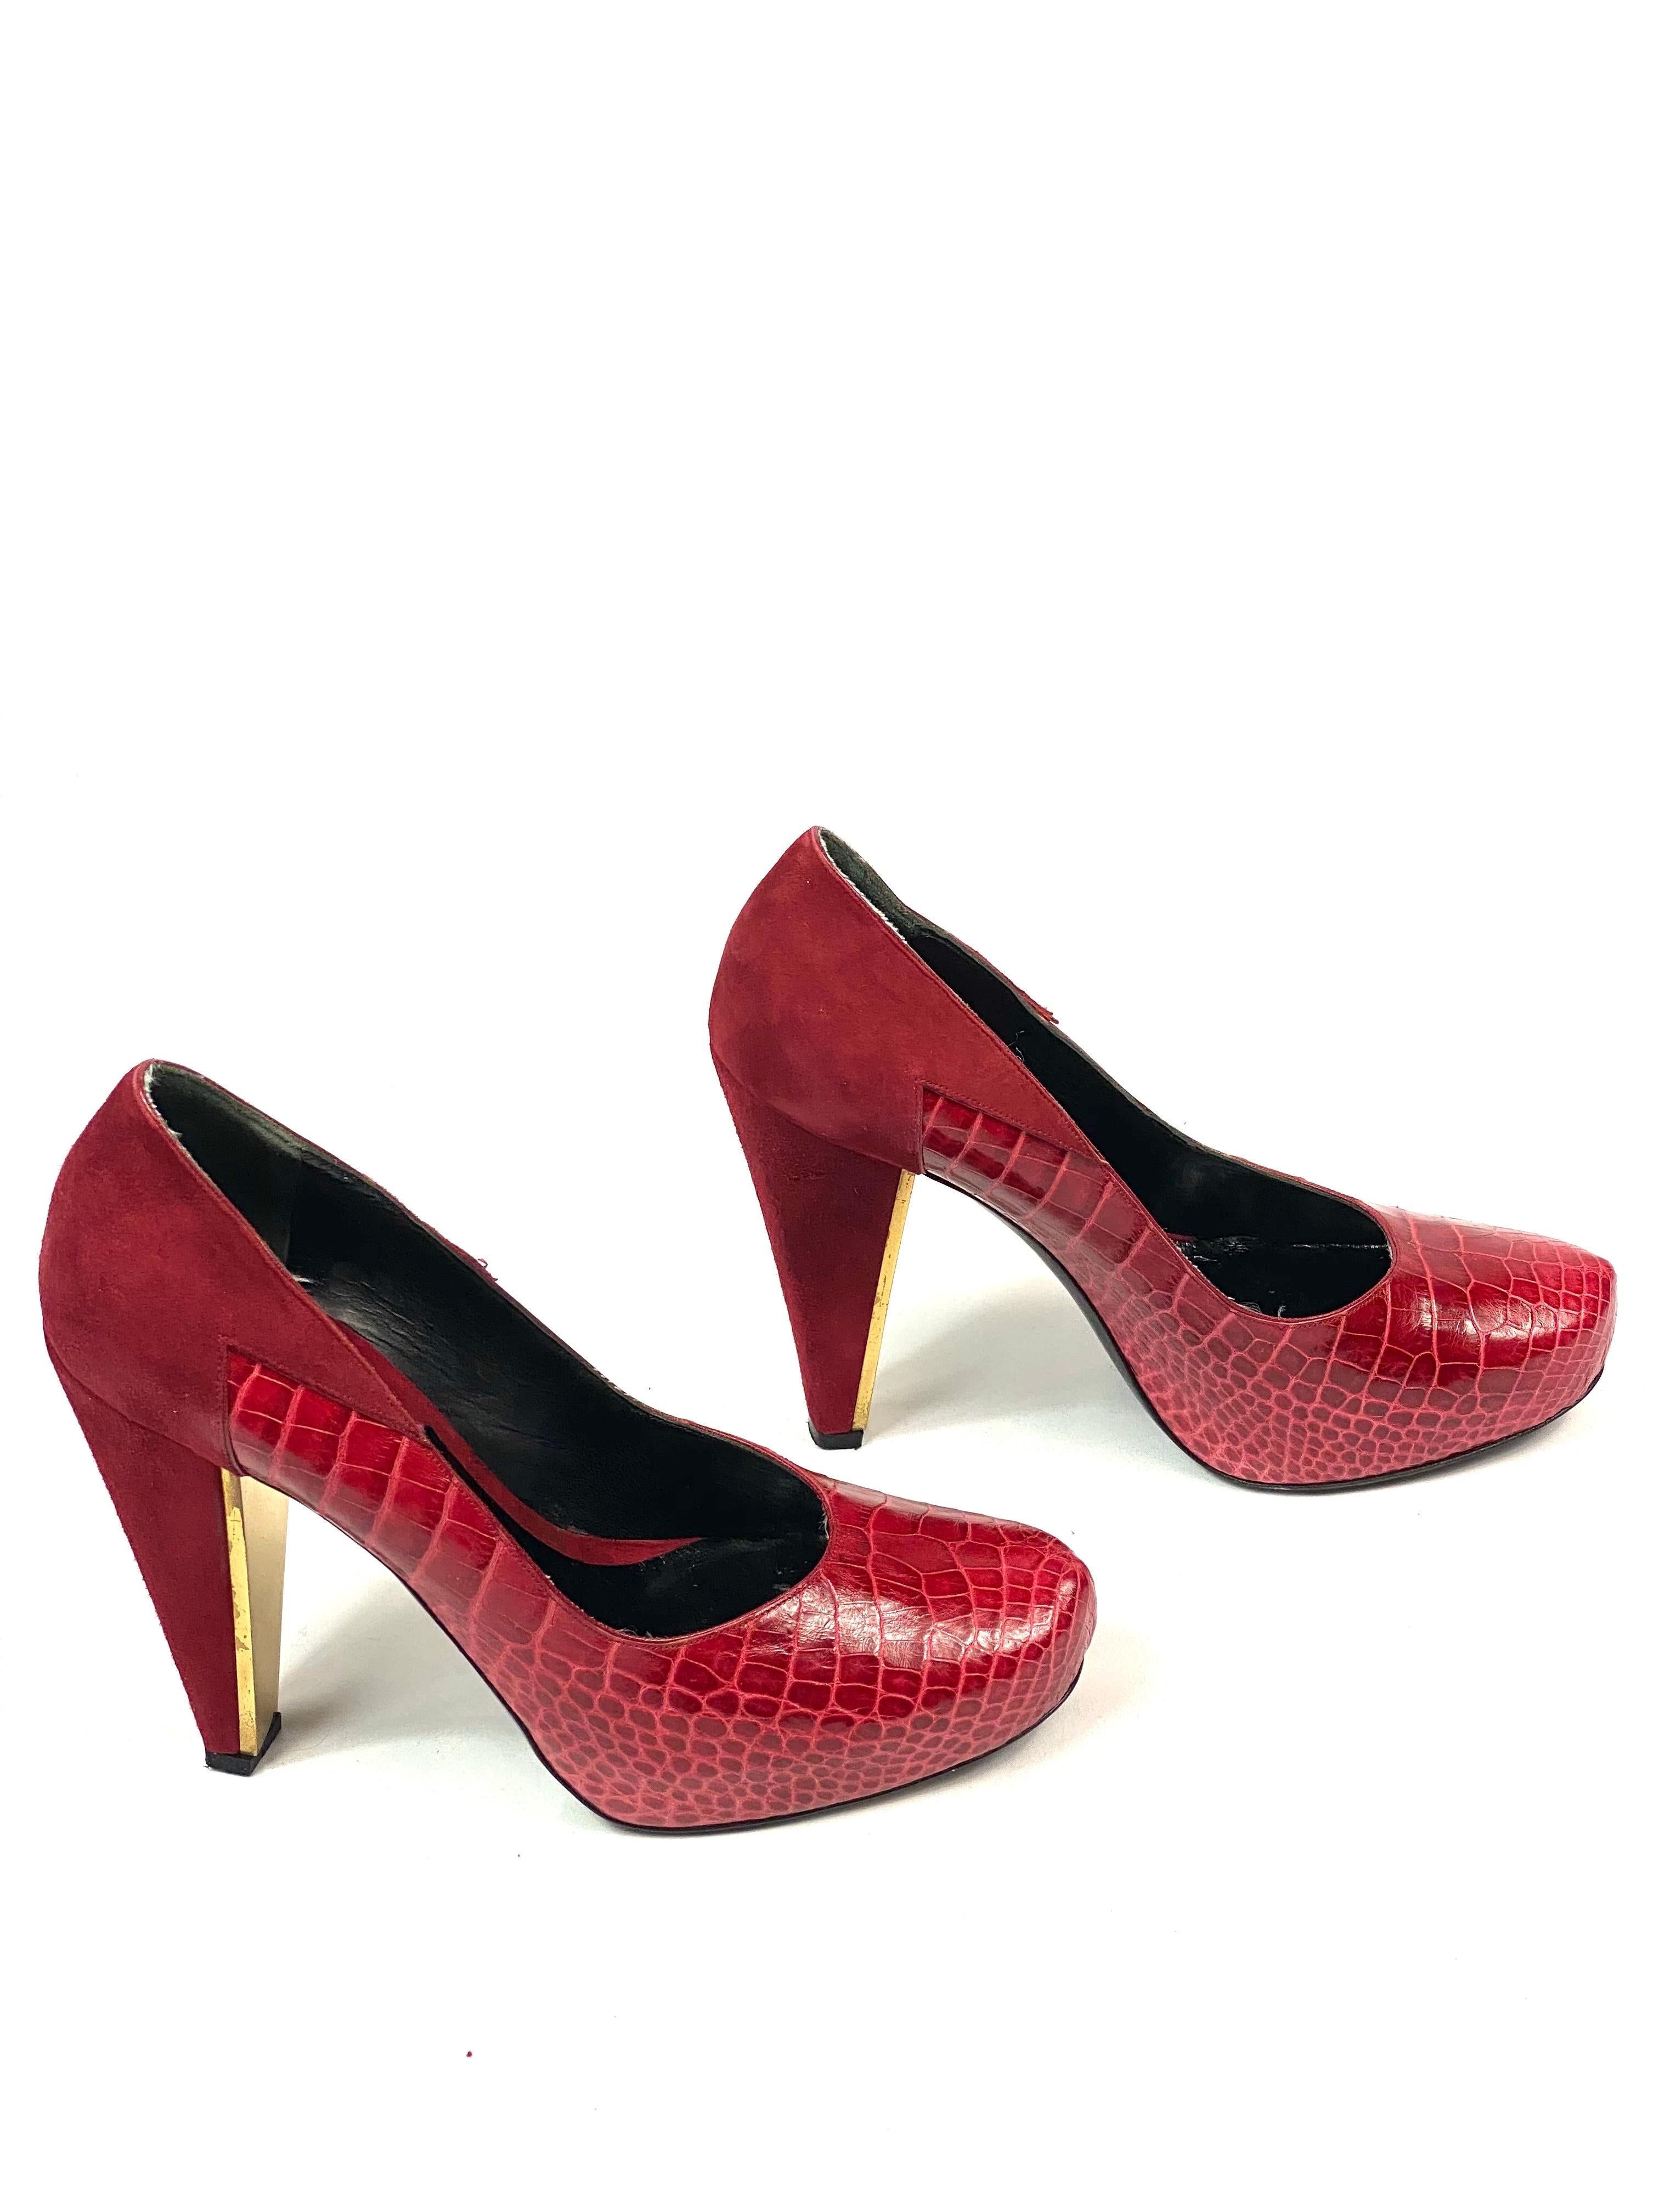 Women's or Men's Donna Karan Collections Red Crocodile and Suede Pump Heels Shies Size 38 For Sale